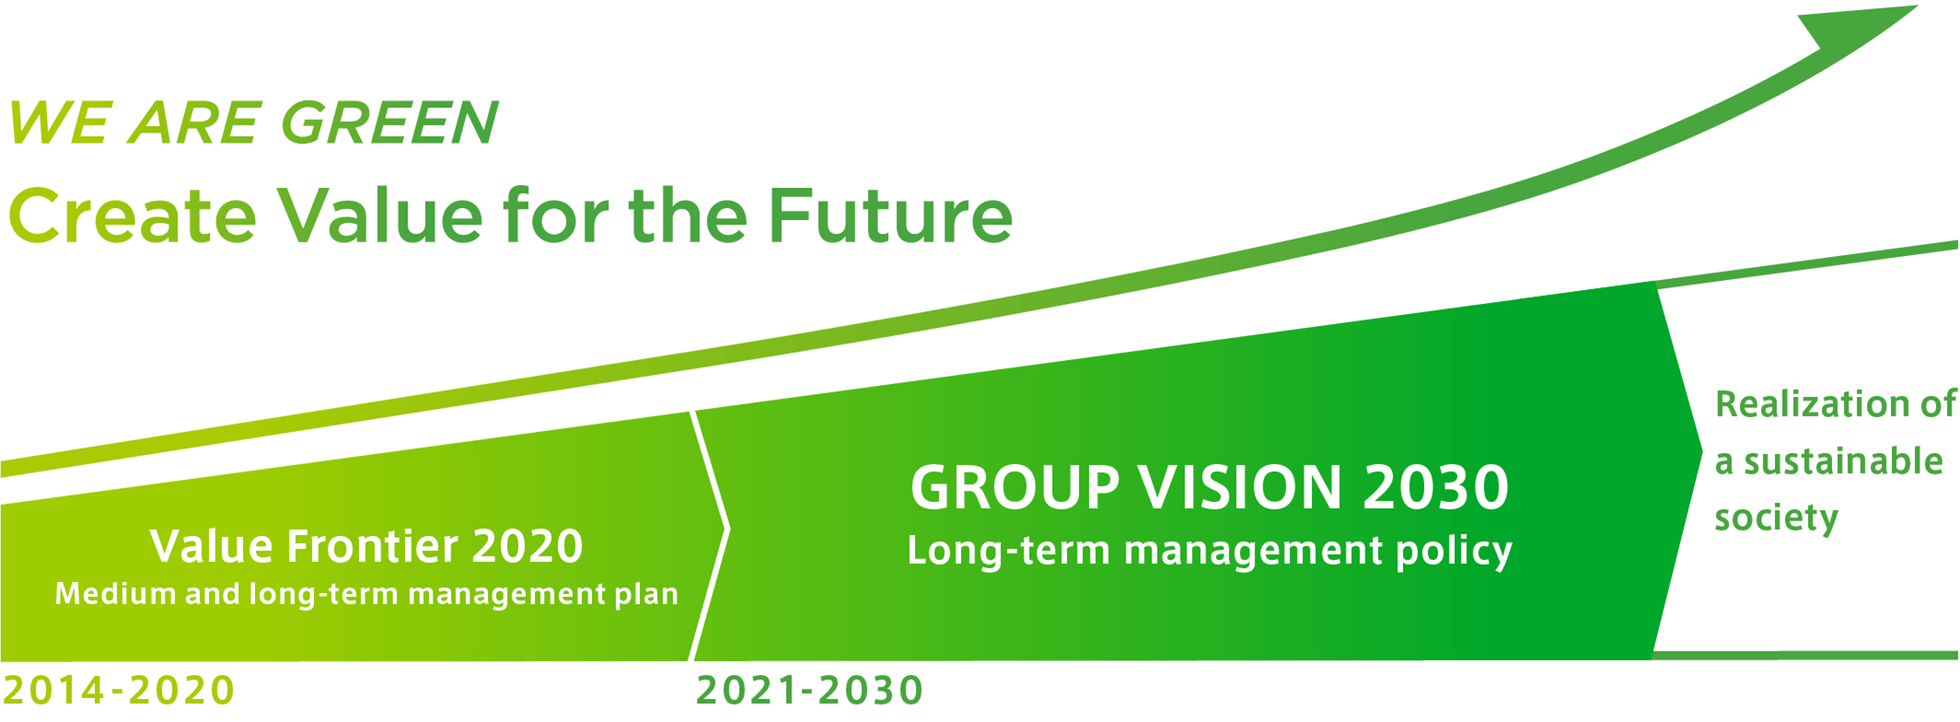 WE ARE GREEN　Create Value for the Future 2014-2020：Value Frontier 2020 Medium and long-term management plan、2021-2030：GROUP VISION 2030 Long-term management policy Realization of a sustainable society